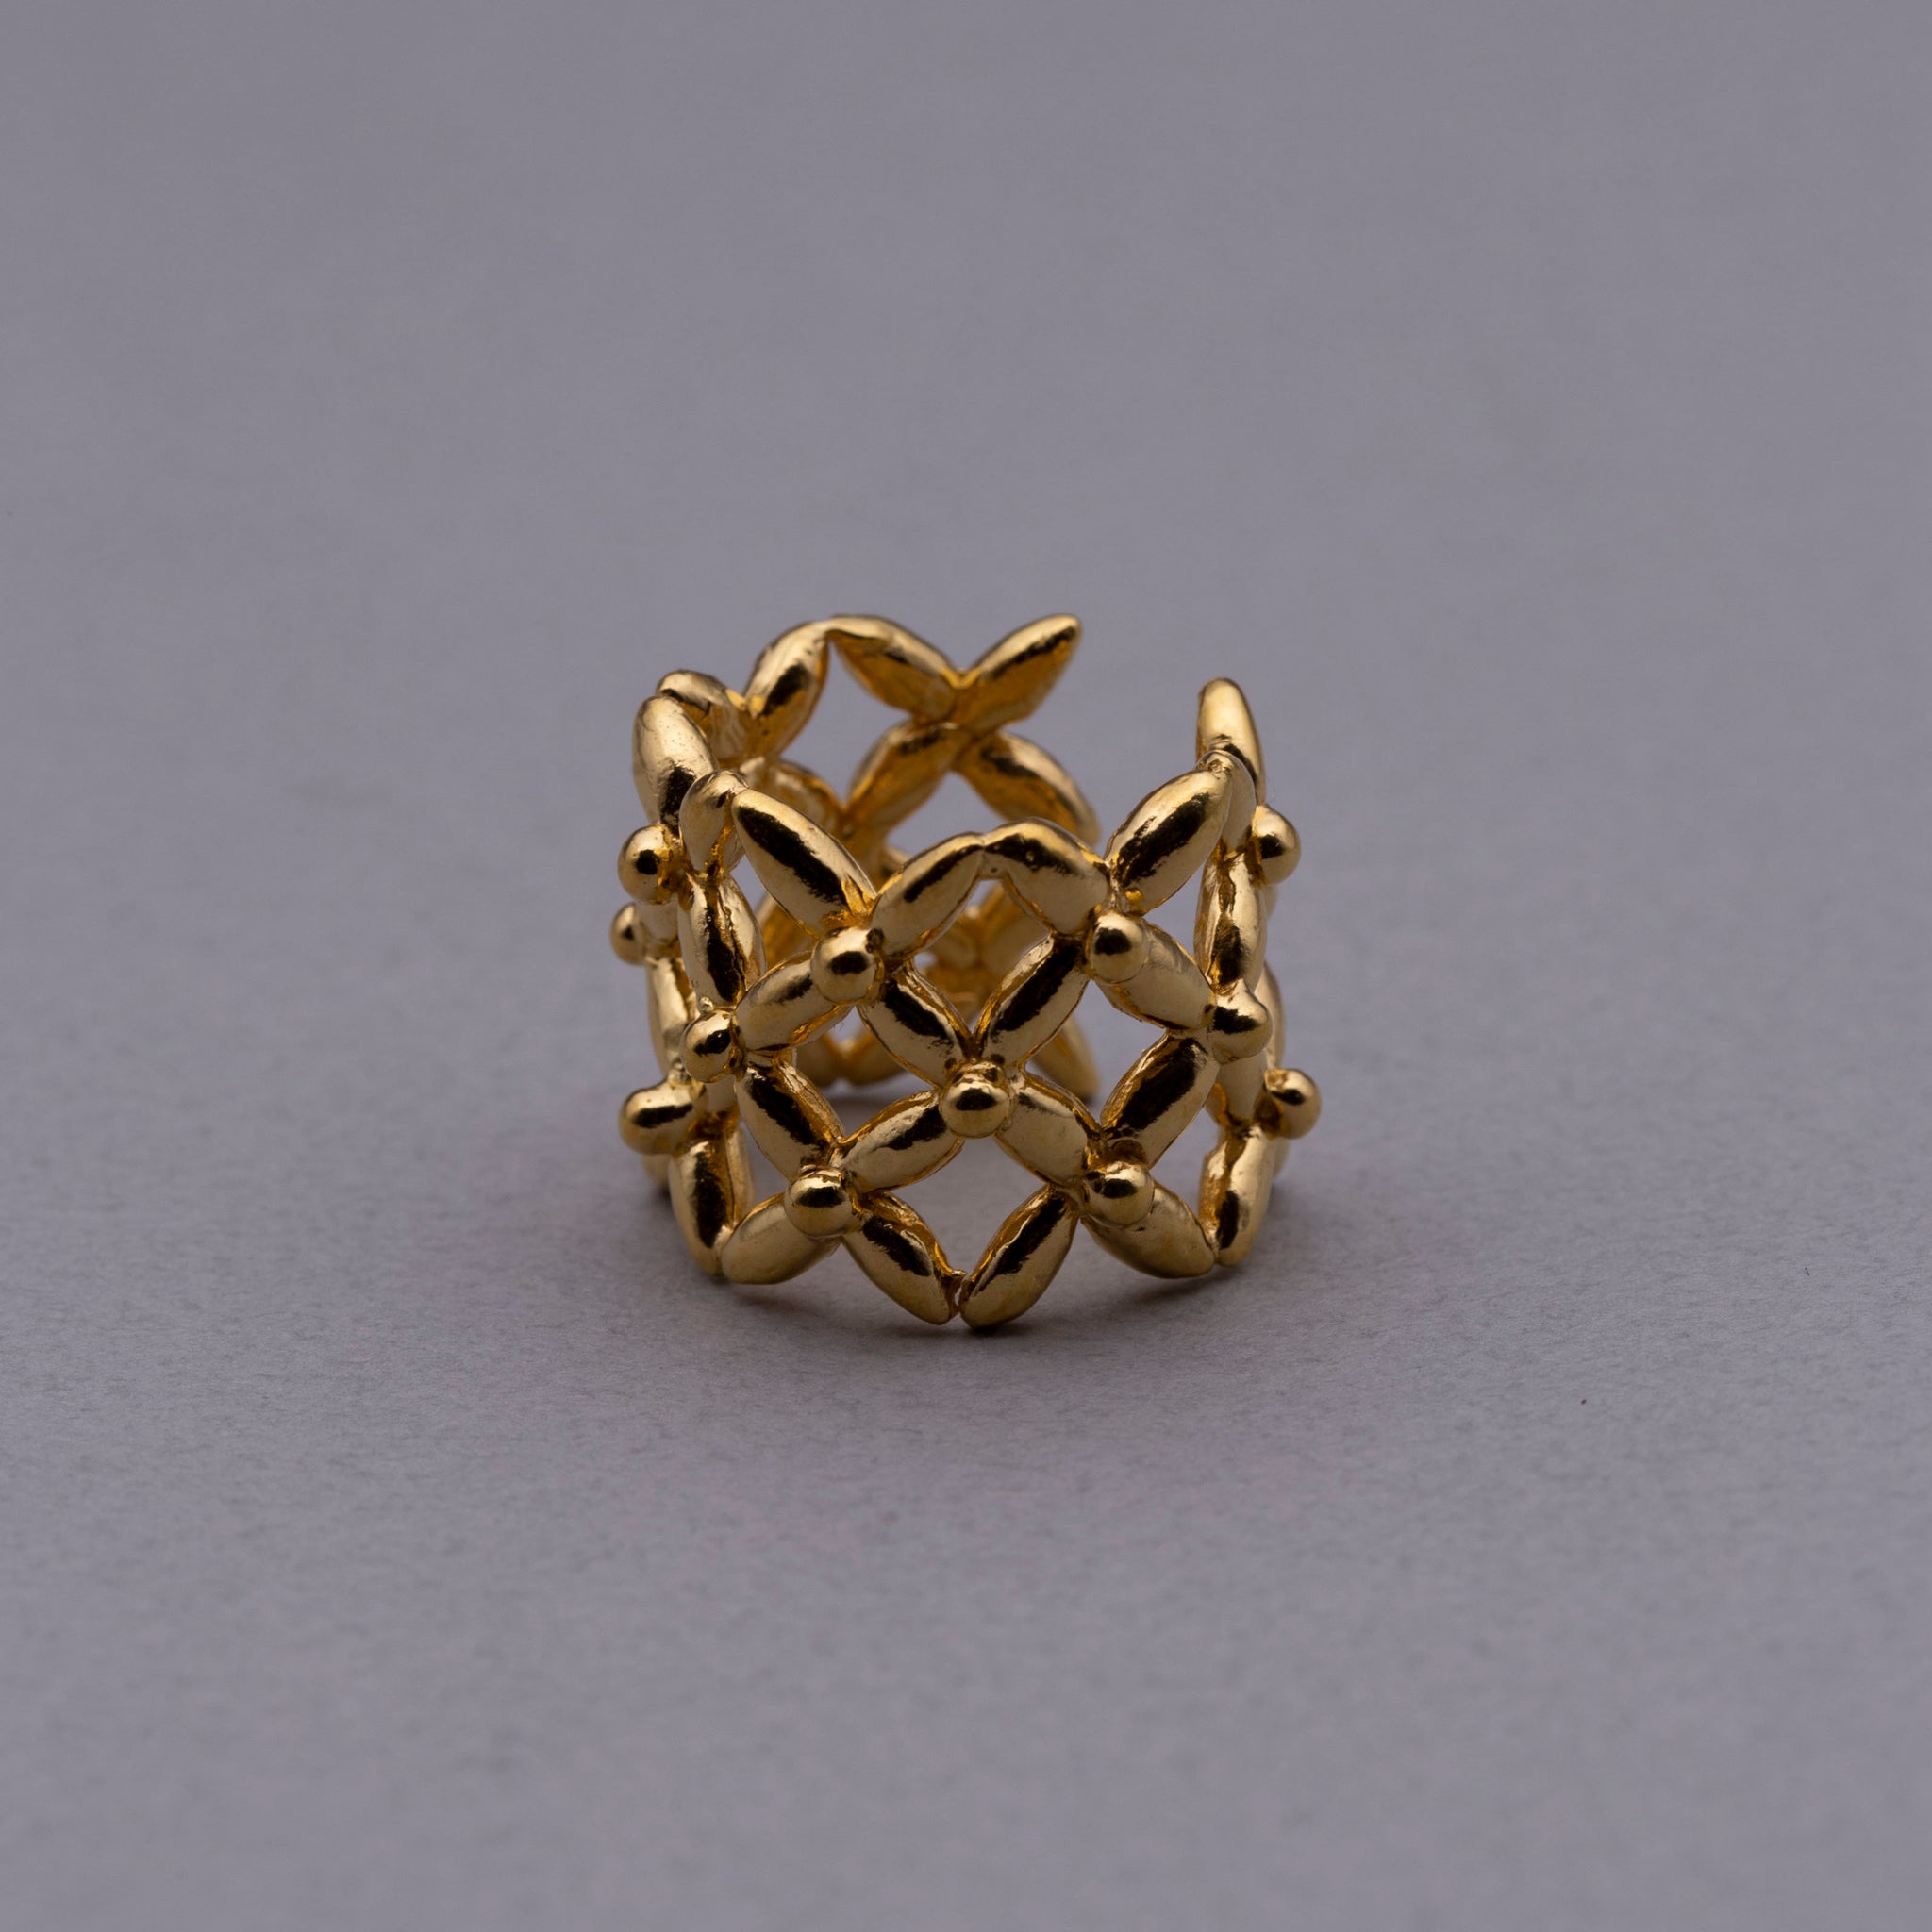 2 Frower net ring Gold